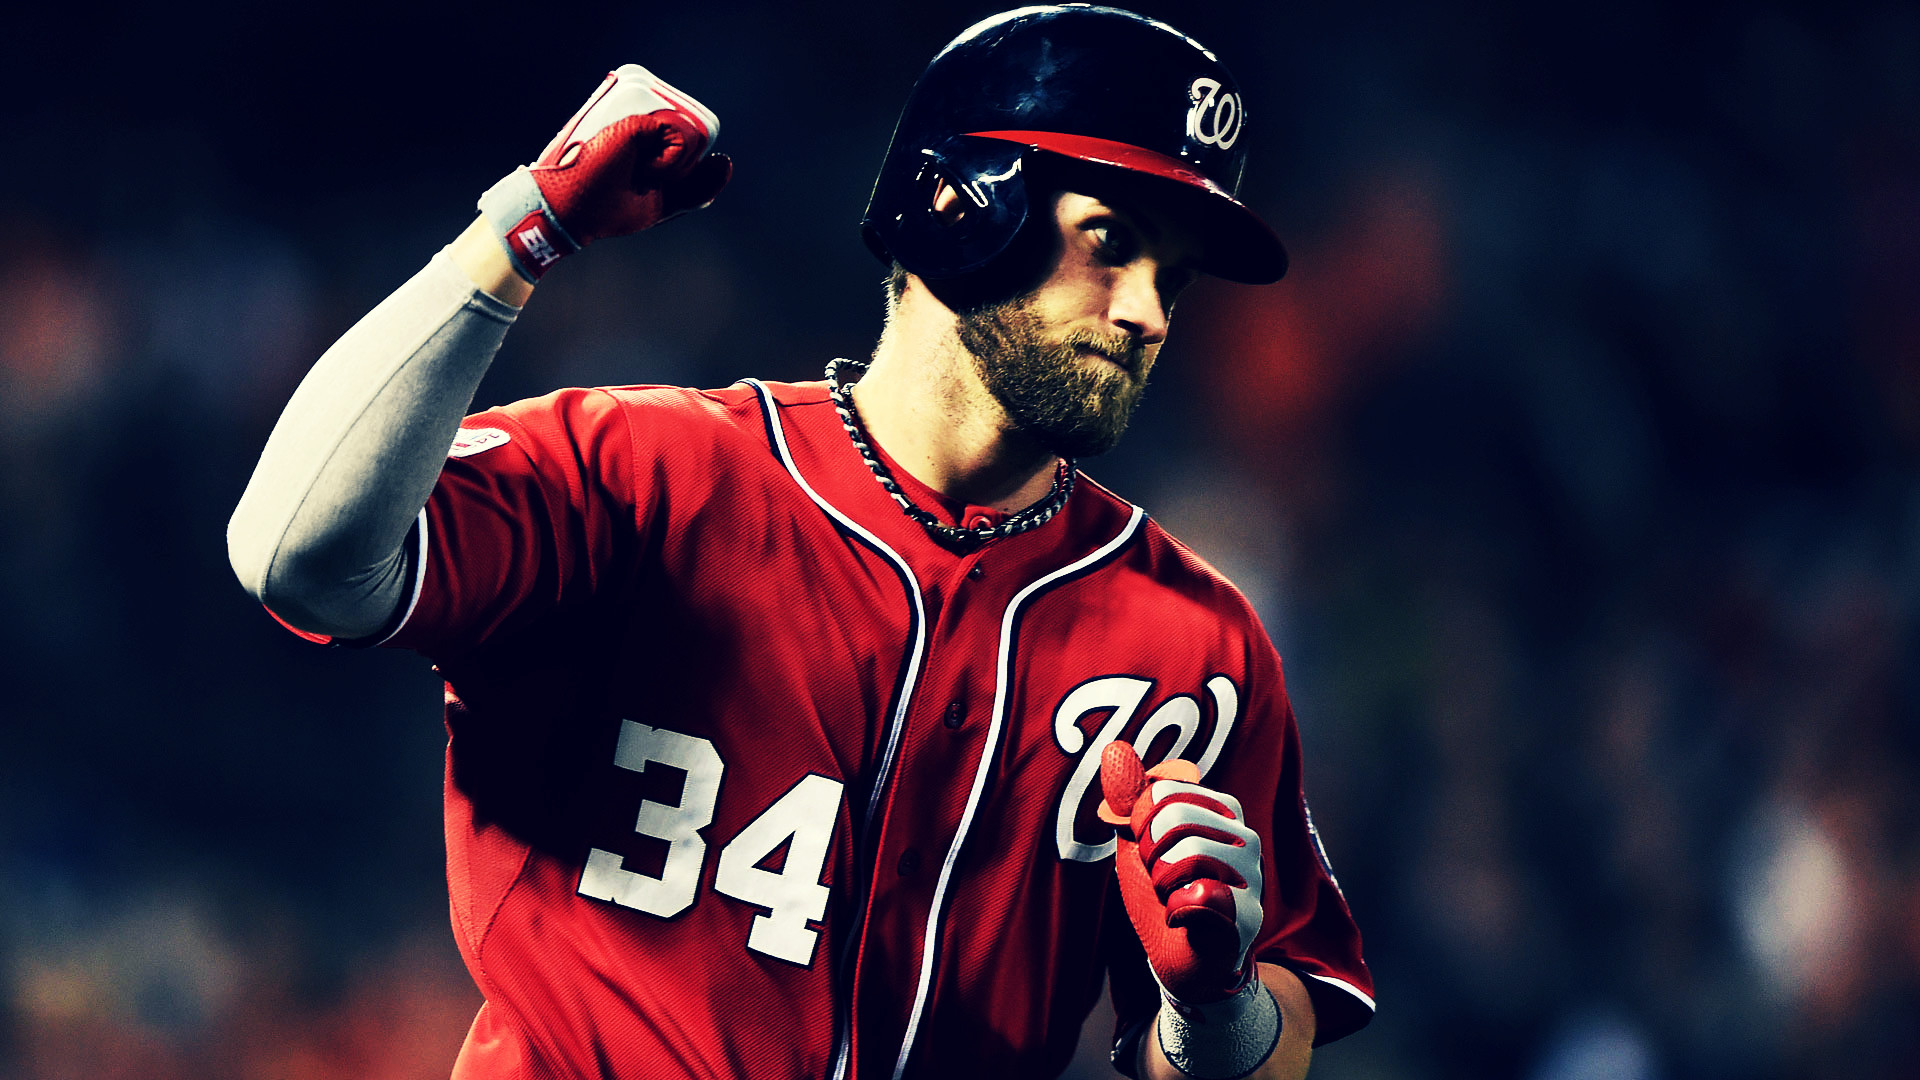 Free download Bryce Harper Wallpapers 65 images [1920x1080] for